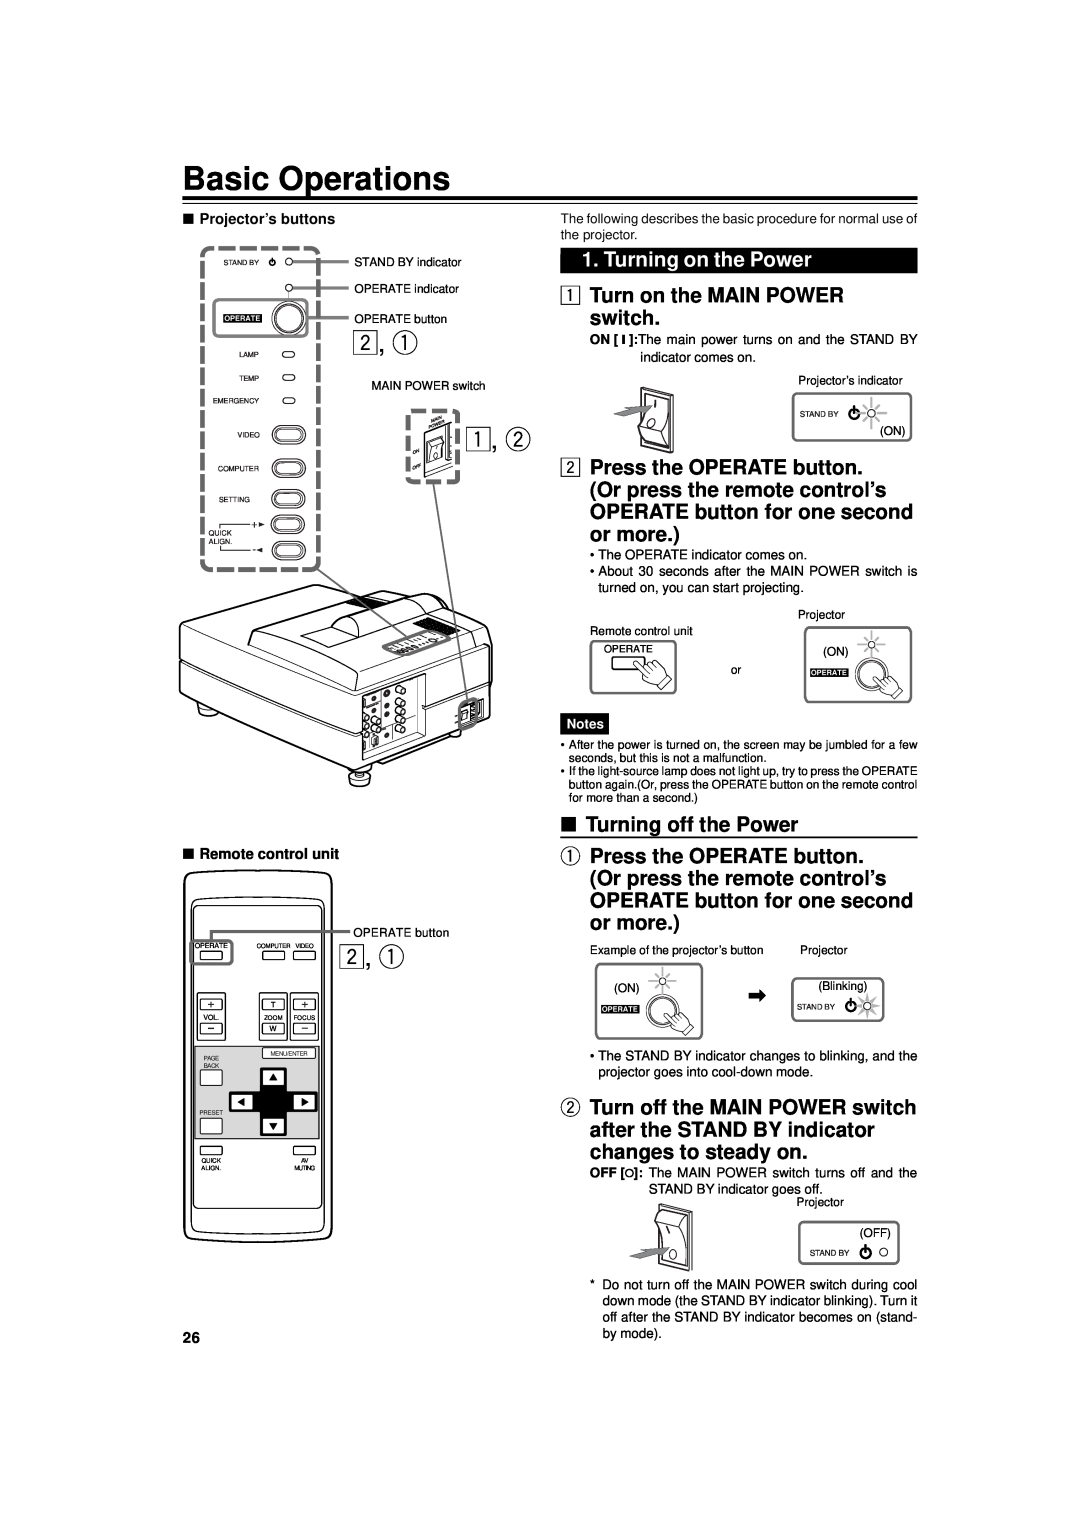 JVC DLA-G11U manual Basic Operations, Turning on the Power, Turn on the MAIN POWER switch, Turning off the Power 